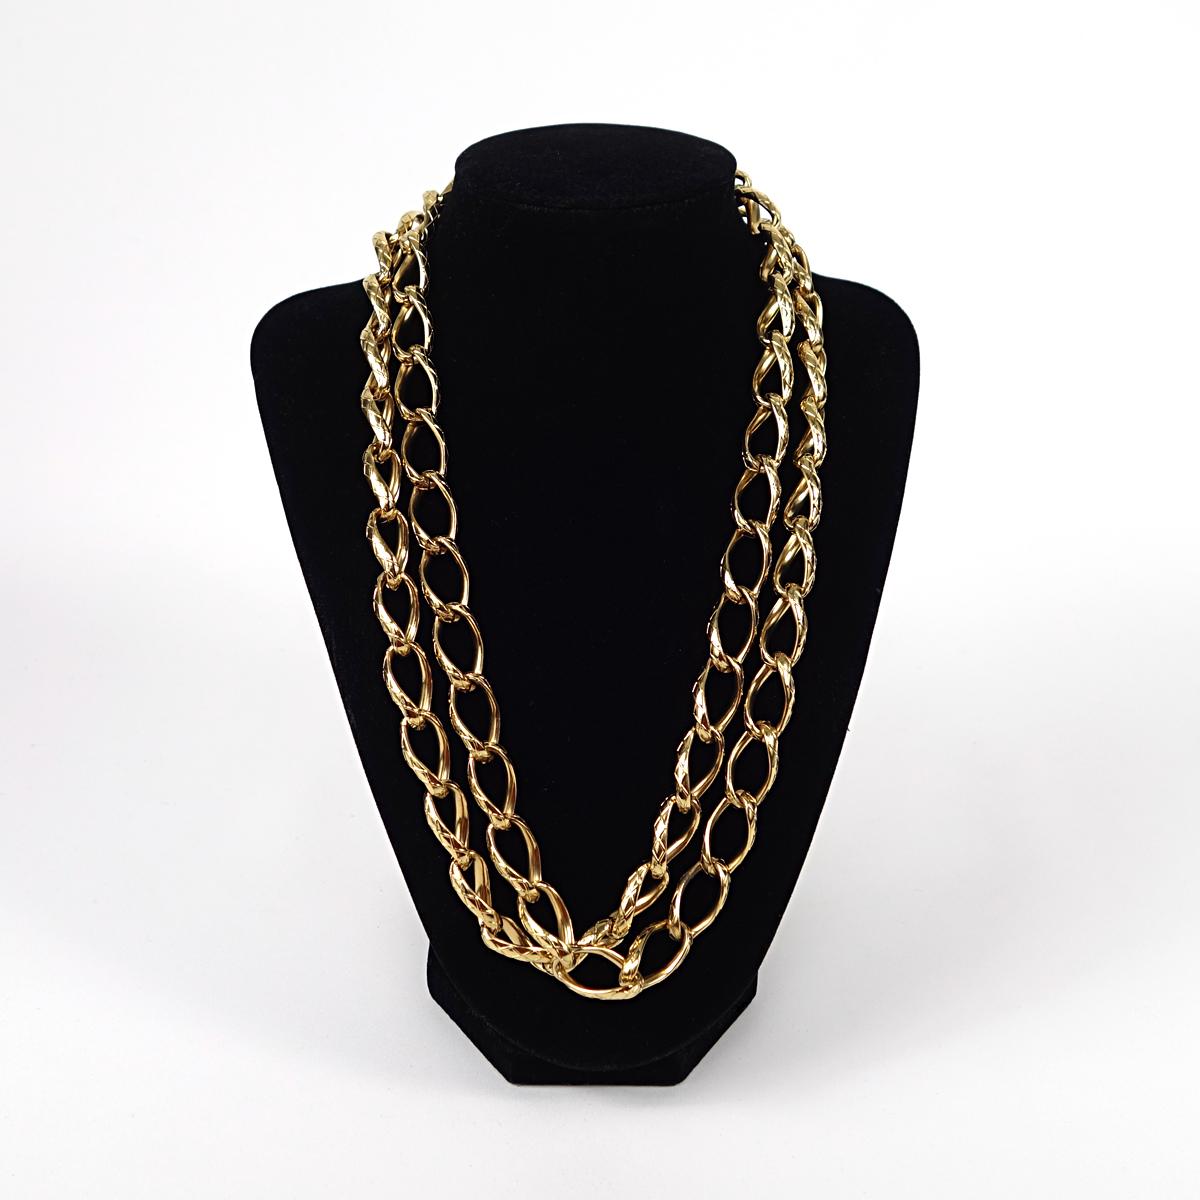 Vintage gold plated Christian Dior necklace with large chains.